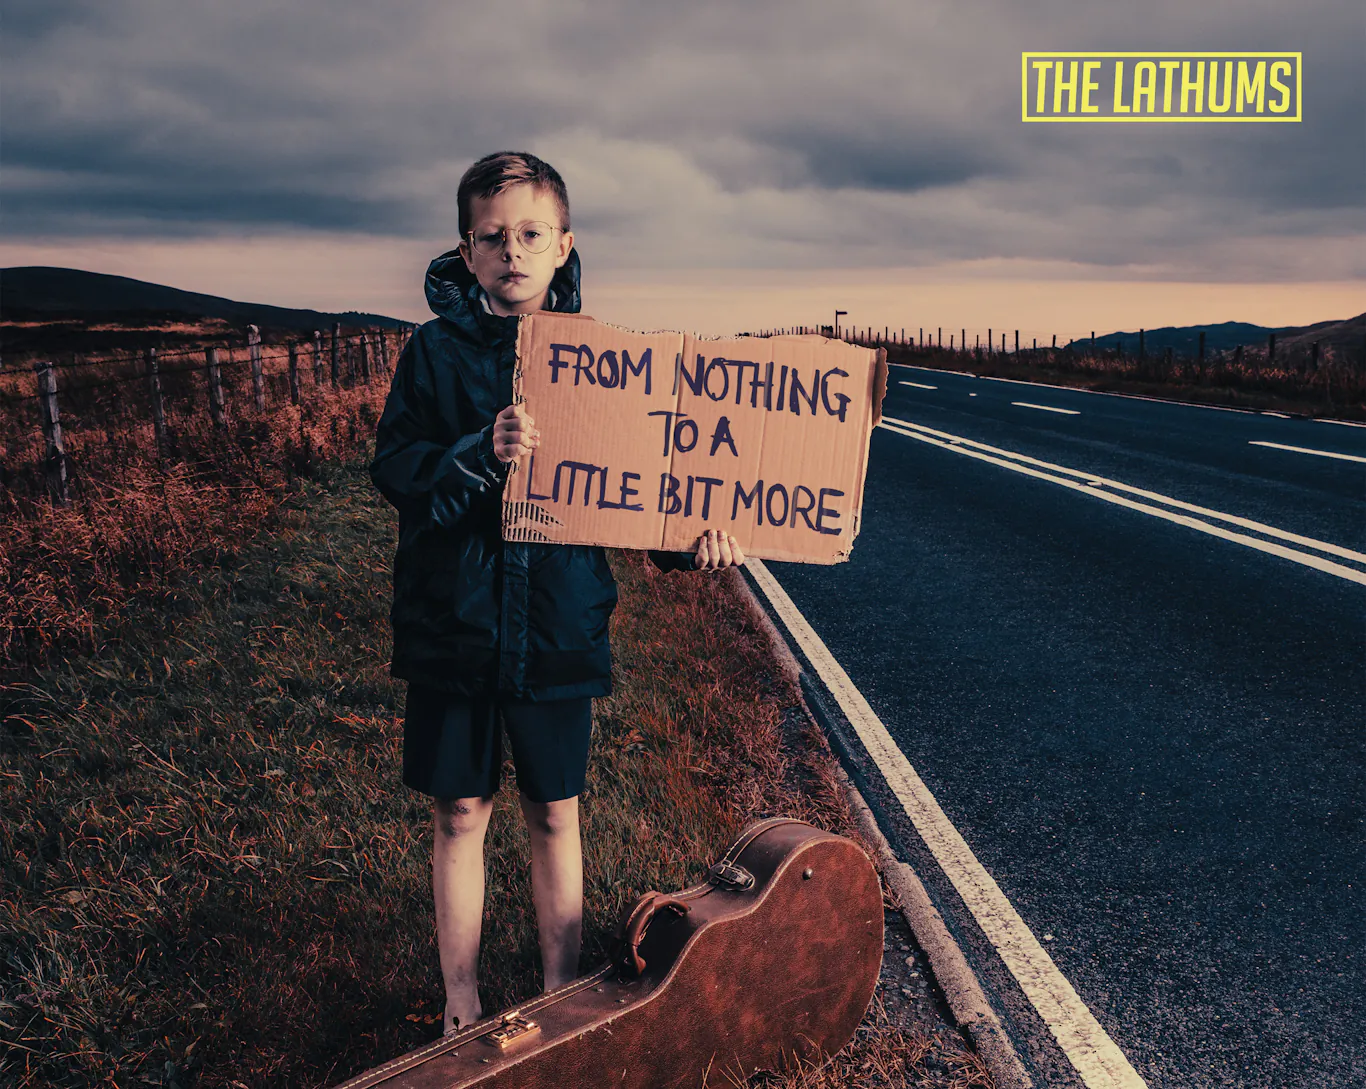 ALBUM REVIEW: The Lathums – From Nothing To A Little Bit More